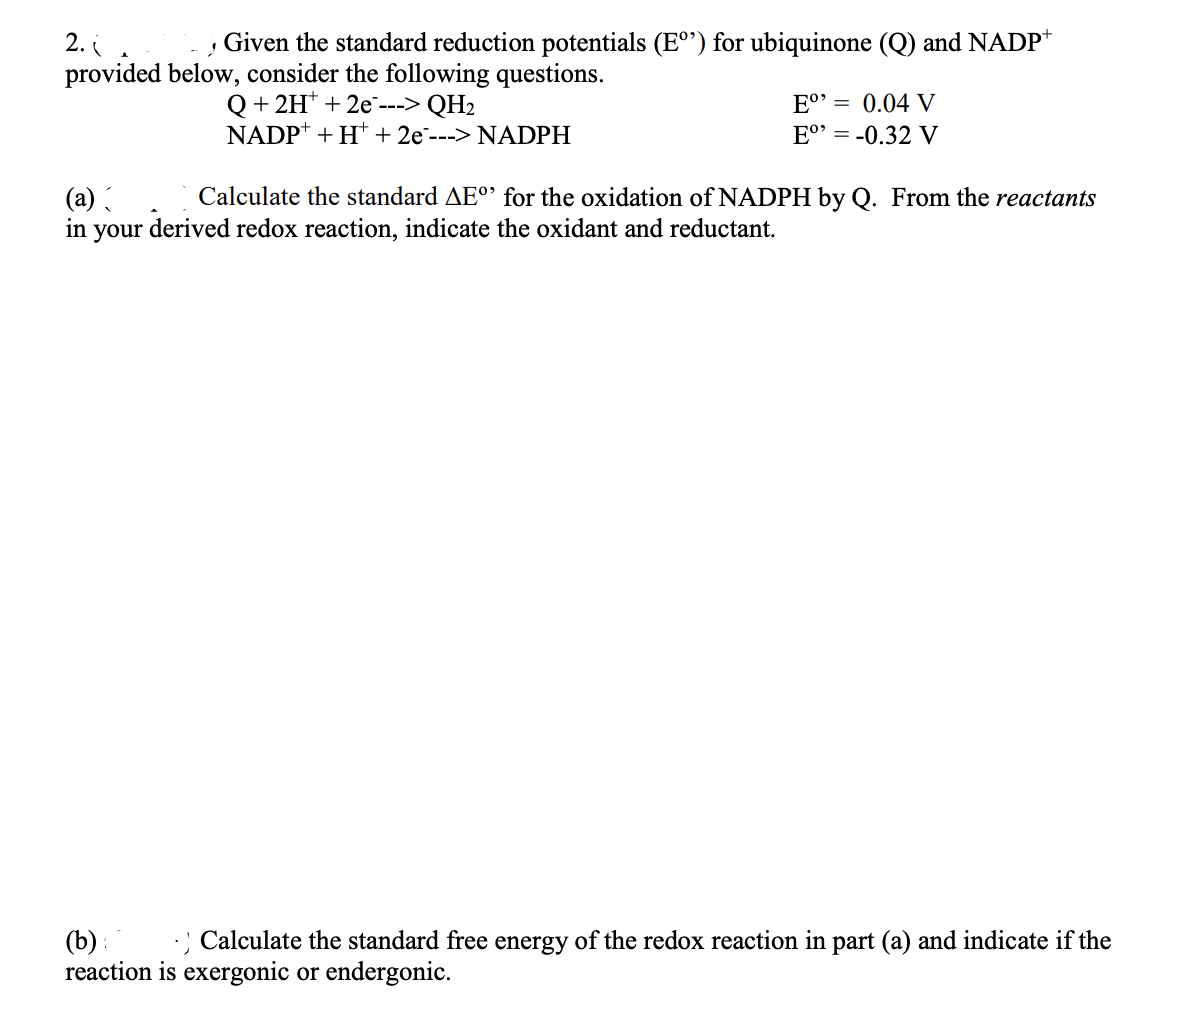 2.(
J Given the standard reduction potentials (E°) for ubiquinone (Q) and NADP+
provided below, consider the following questions.
Q+ 2H+ + 2e ---> QH₂
NADP+ + H+ + 2e---> NADPH
Eº⁹ = 0.04 V
Eº⁹ = -0.32 V
(a) ( Calculate the standard AEº for the oxidation of NADPH by Q. From the reactants
in your derived redox reaction, indicate the oxidant and reductant.
(b): .) Calculate the standard free energy of the redox reaction in part (a) and indicate if the
reaction is exergonic or endergonic.